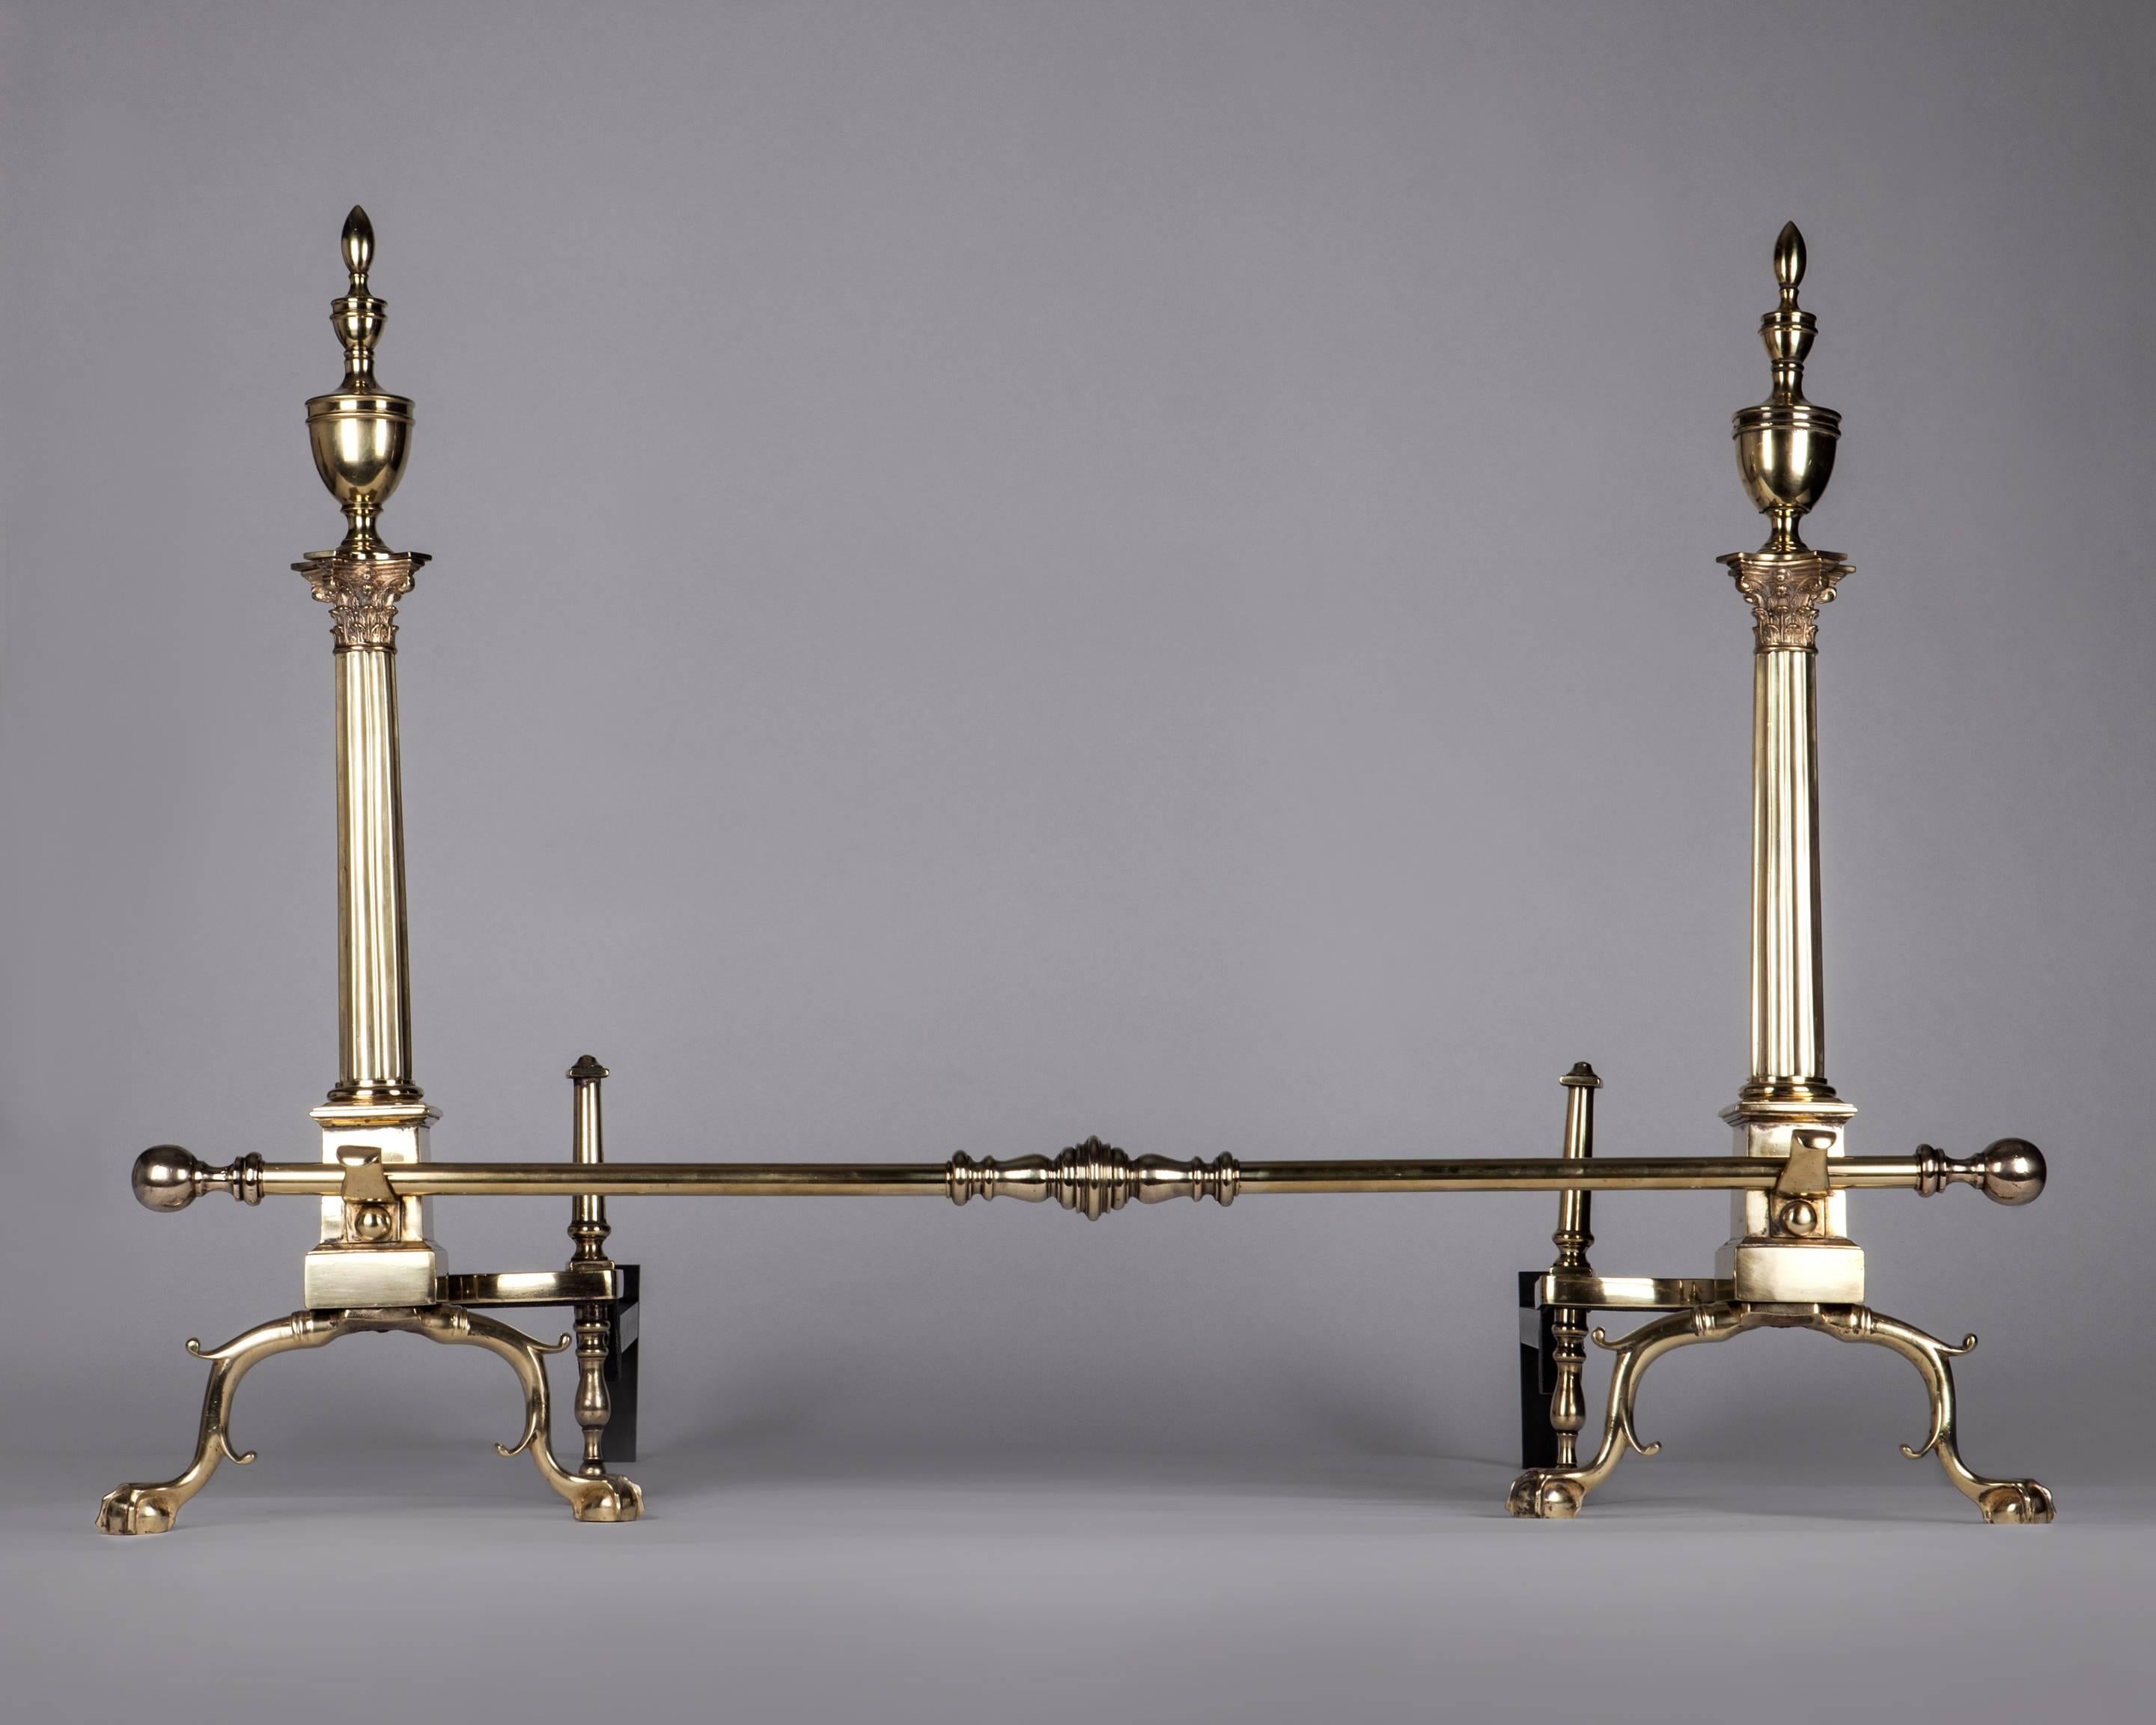 Neoclassical Brass Andirons with Fluted Corinthian Columns and Urn Form Finials, Circa 1920s For Sale